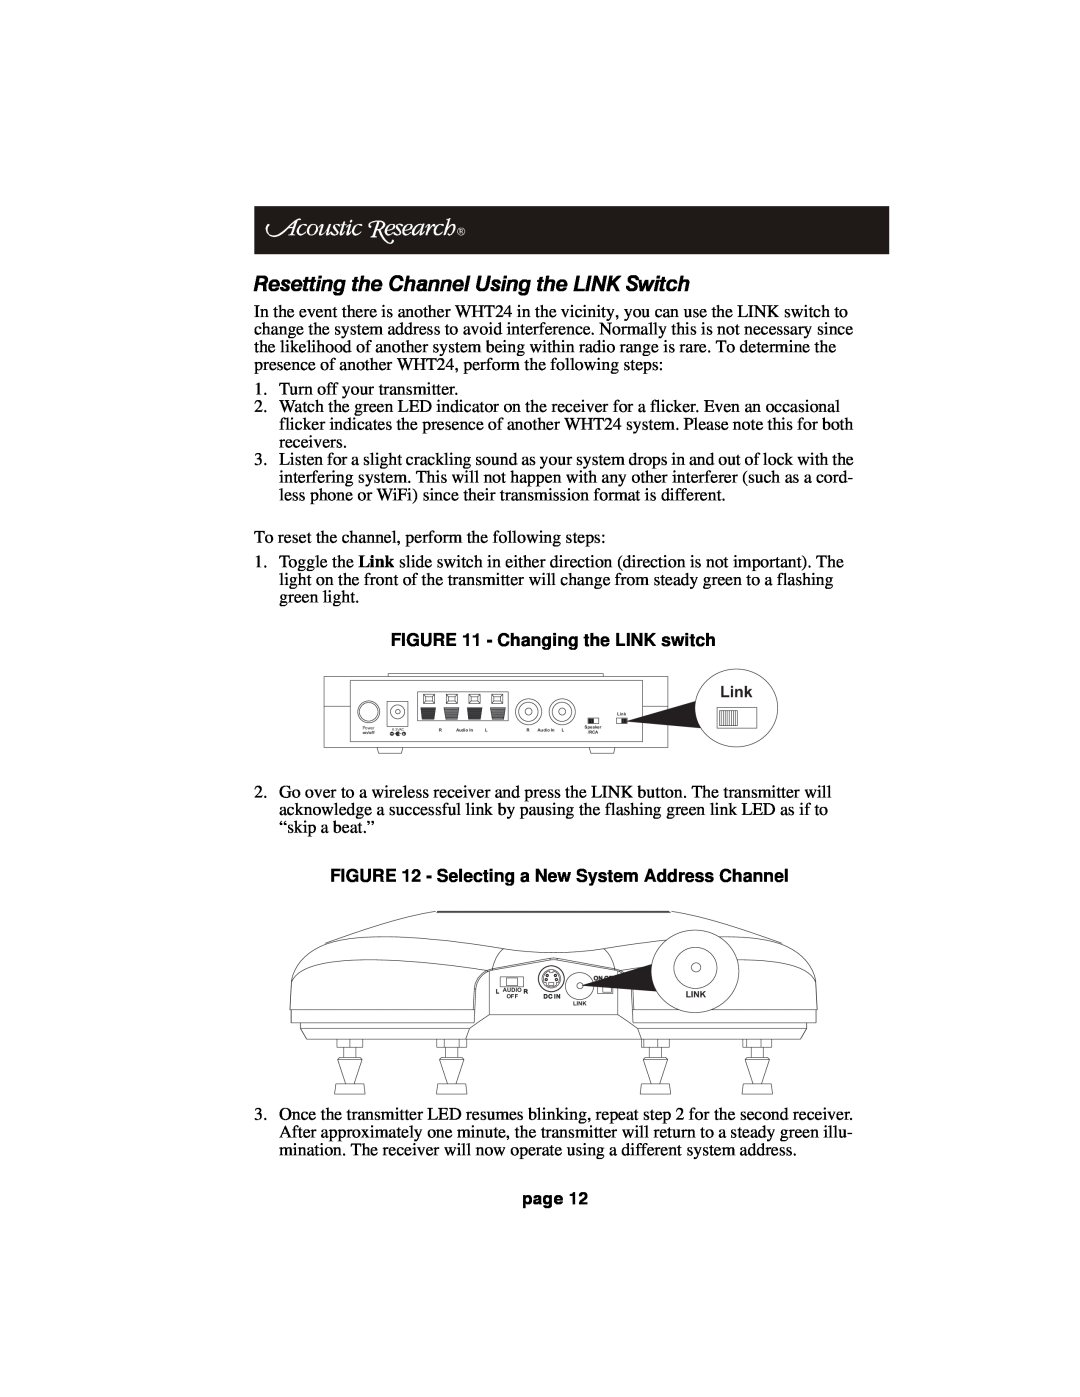 Acoustic Research HT60 operation manual Resetting the Channel Using the LINK Switch, Changing the LINK switch, page 